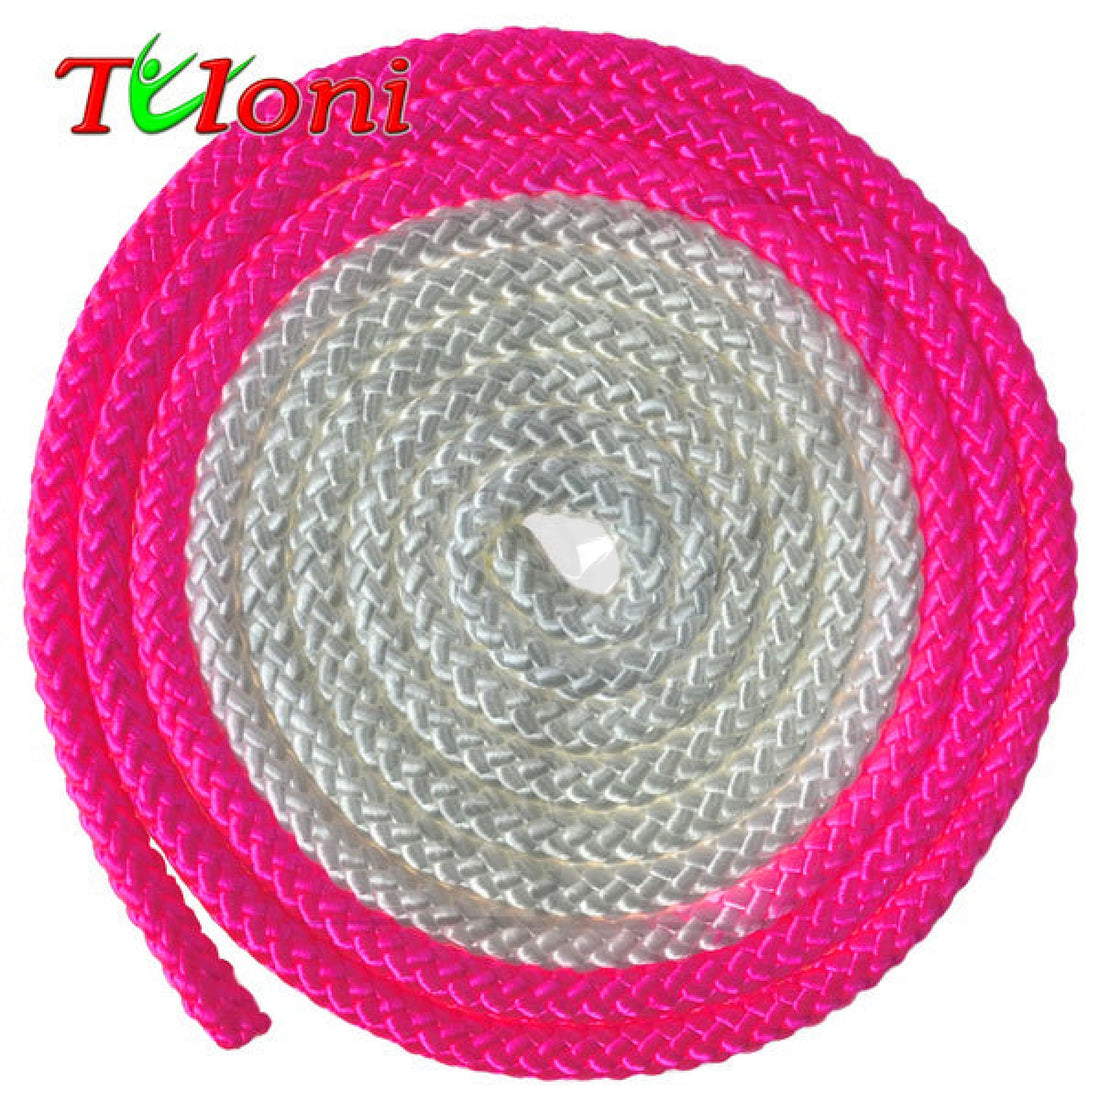 Tuloni Multicolour Rope 3M Neon Pink X White Ropes